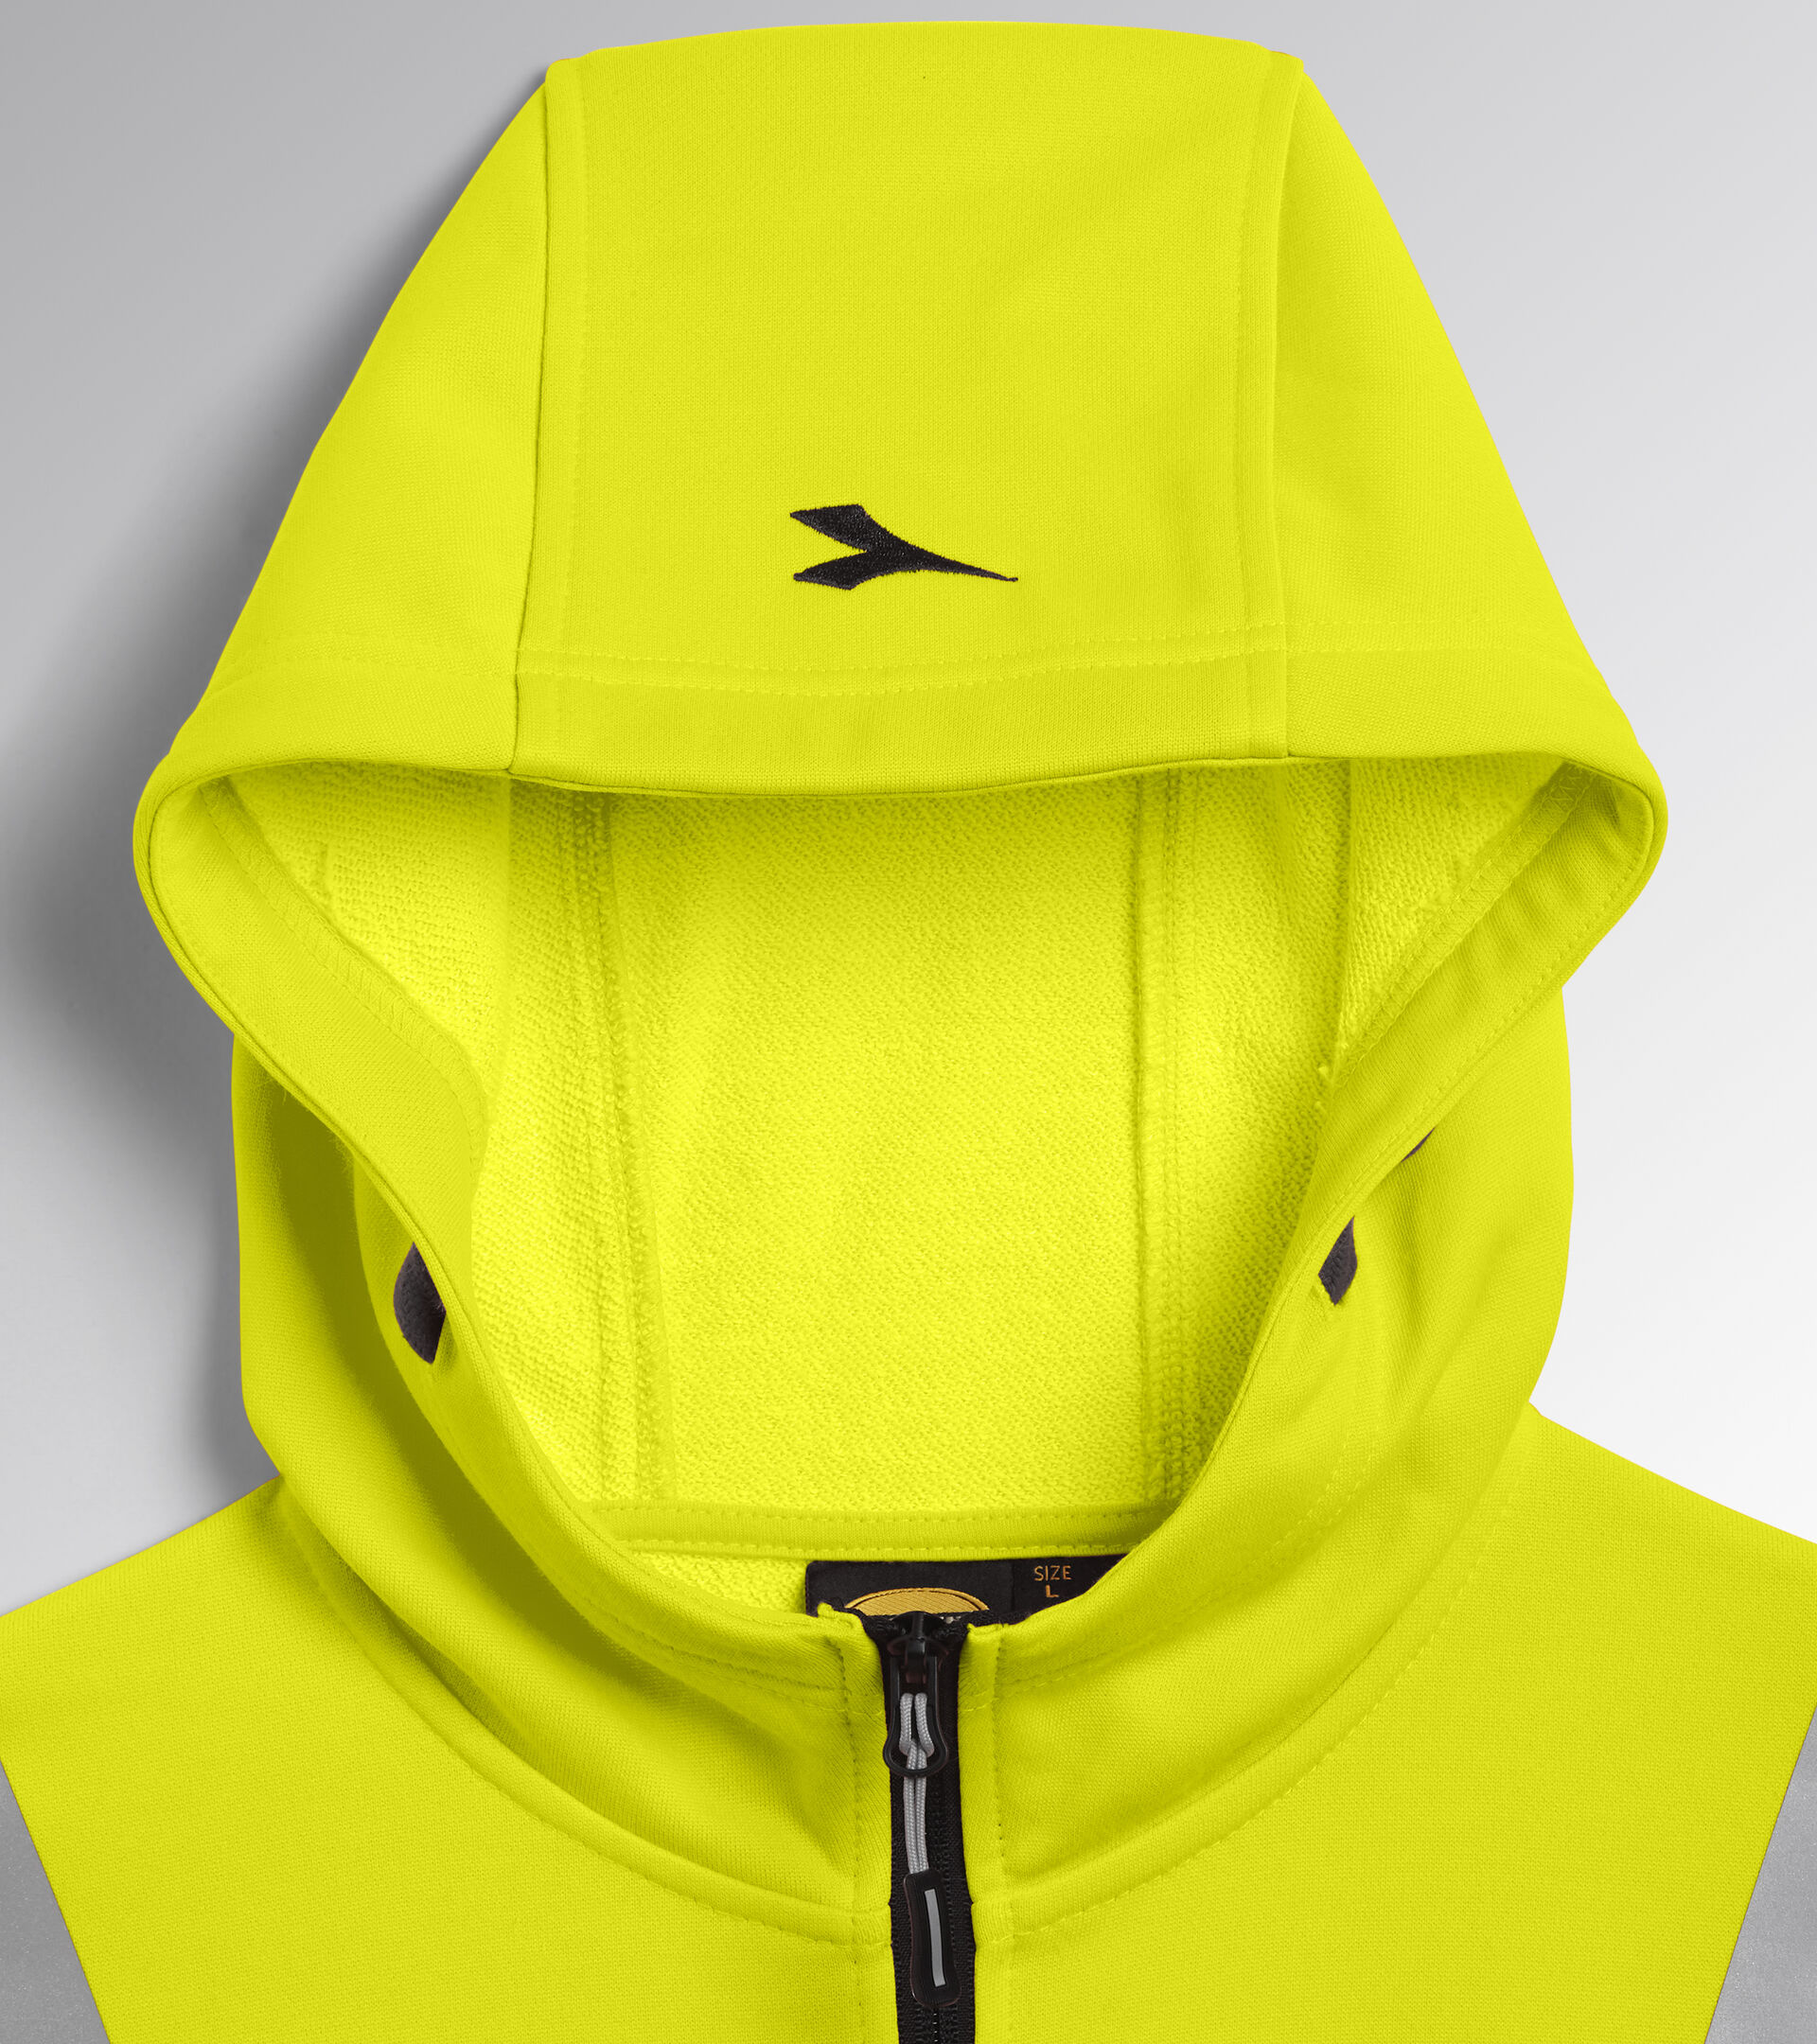 Work track jacket HOODIE FZ HV 20471:2013 2 FLUORESCENT YELLOW ISO20471 - Utility